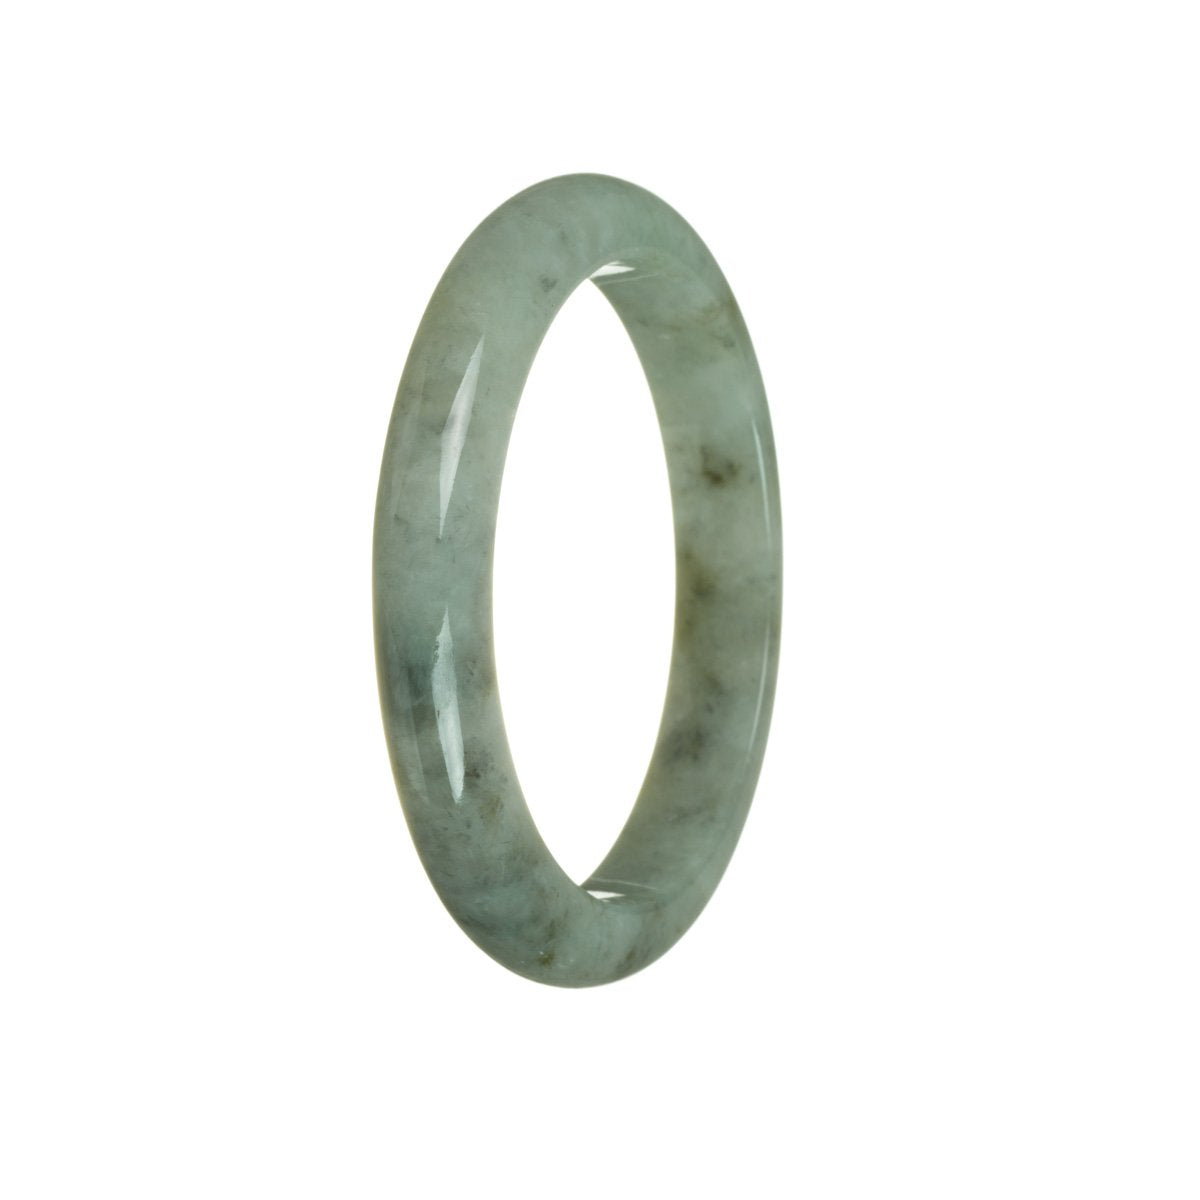 A close-up photo of a beautiful bracelet made of grey and green jadeite jade, shaped like a half moon, with a diameter of 60mm.